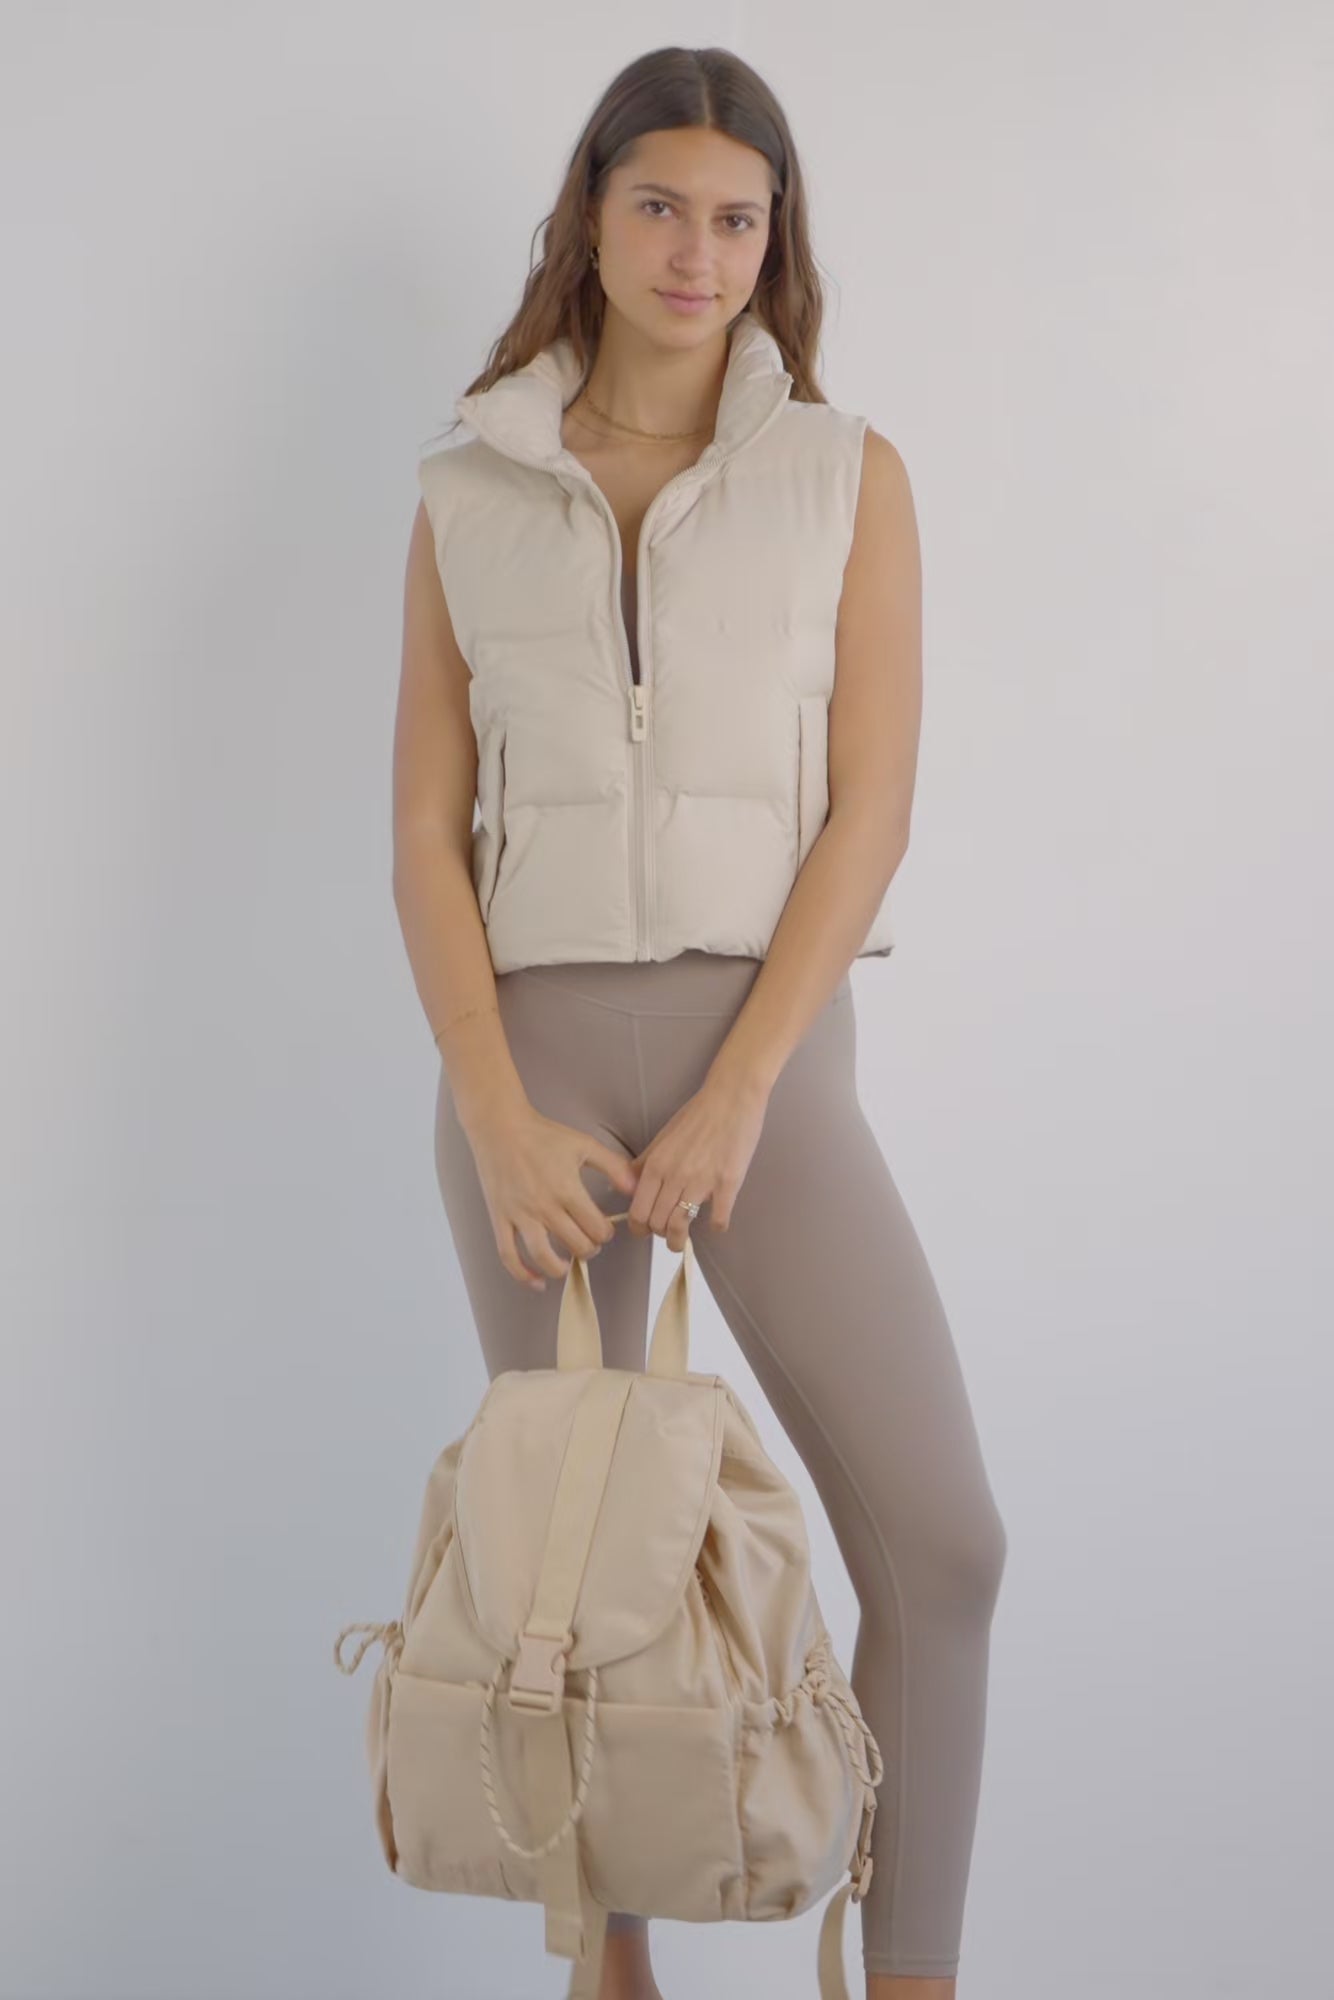 Tennis Backpack Inspired Beige Chic Backpack The in - Sport